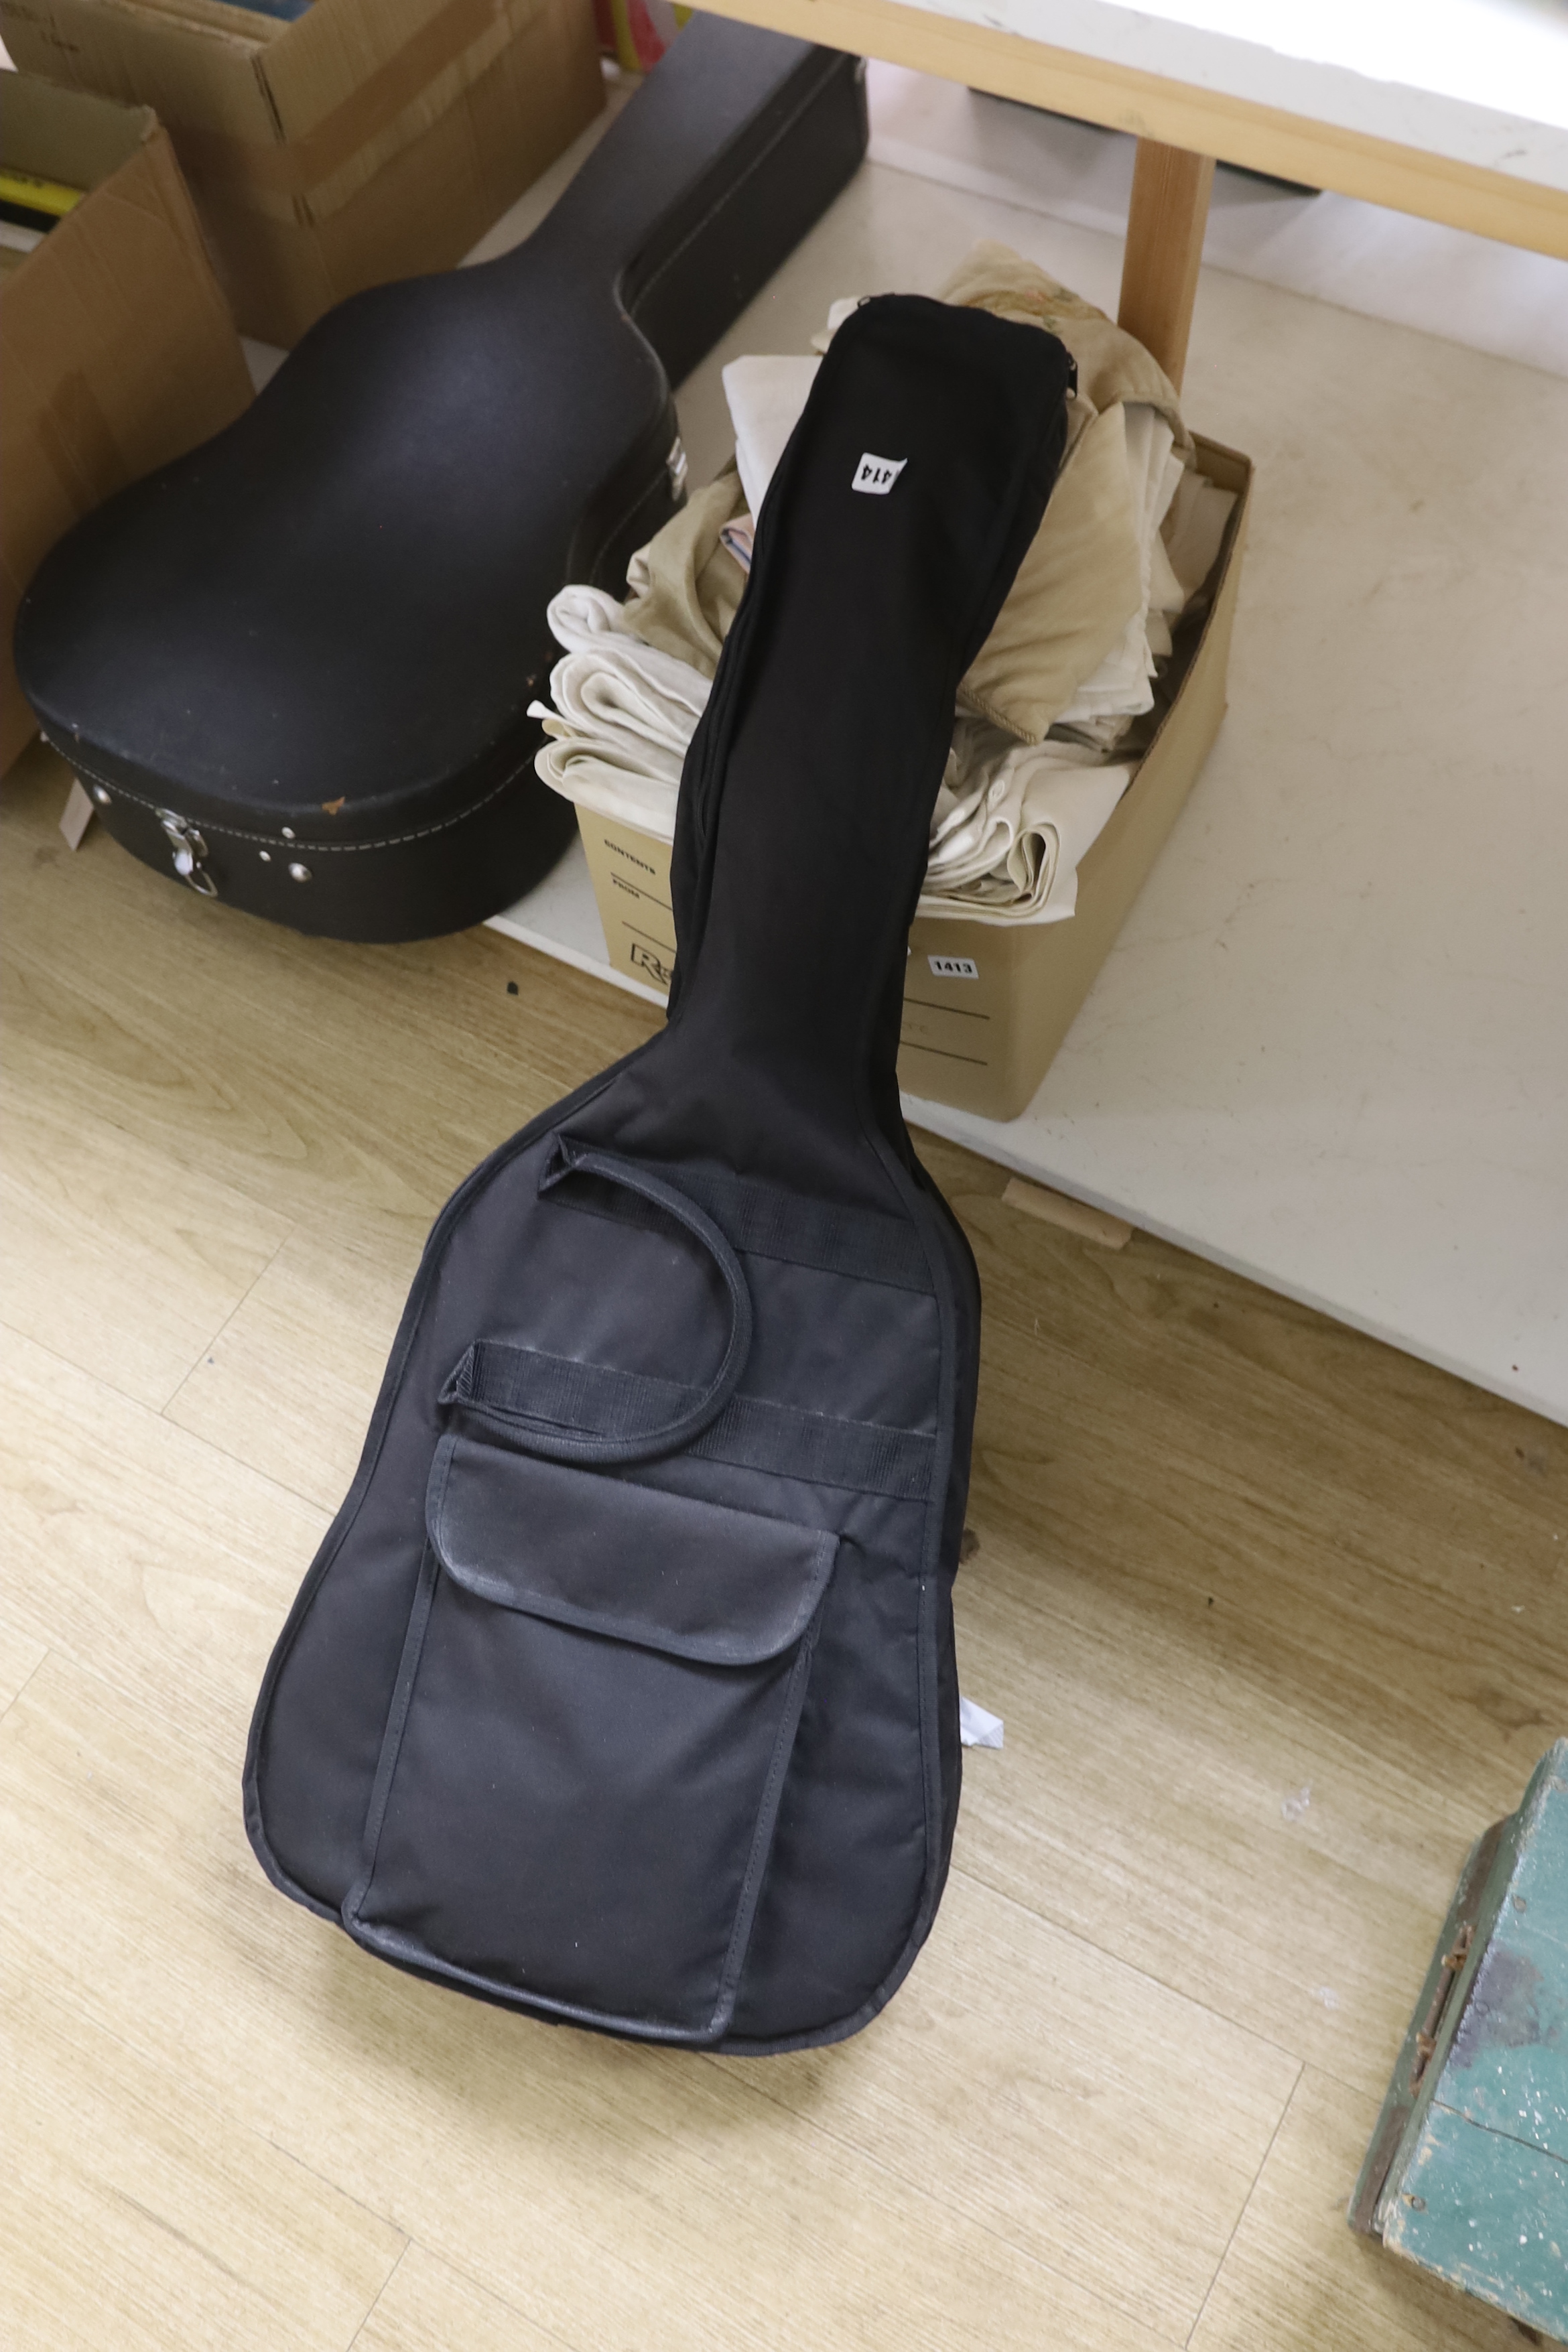 A Rockwood acoustic guitar, in a soft case